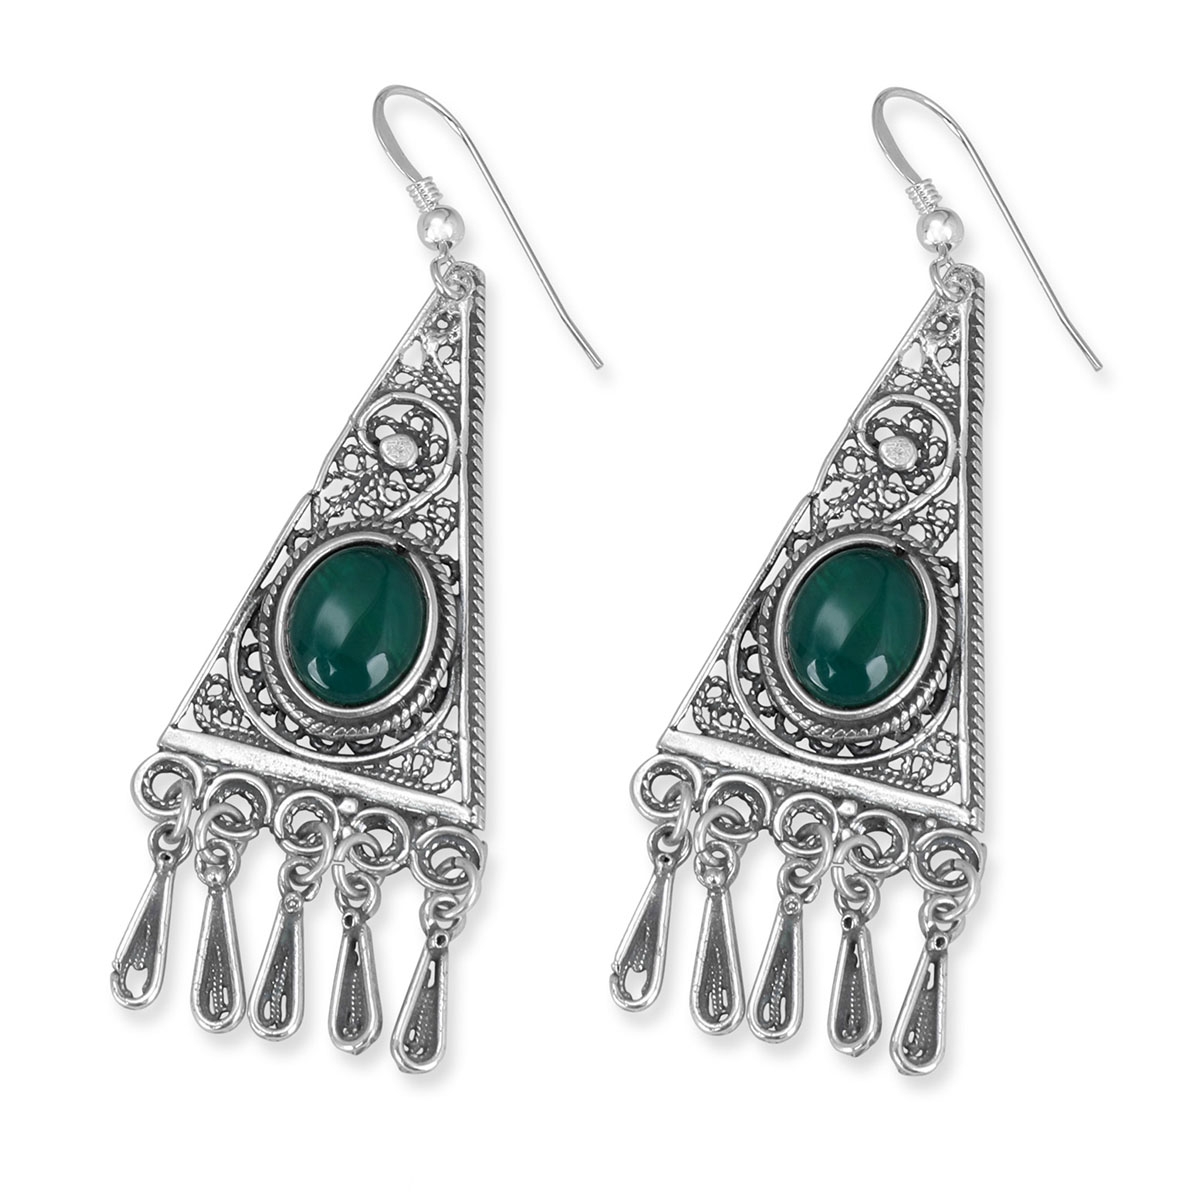 Traditional Yemenite Art Handcrafted Sterling Silver Filigree Triangle Earrings With Green Agate Stone - 1